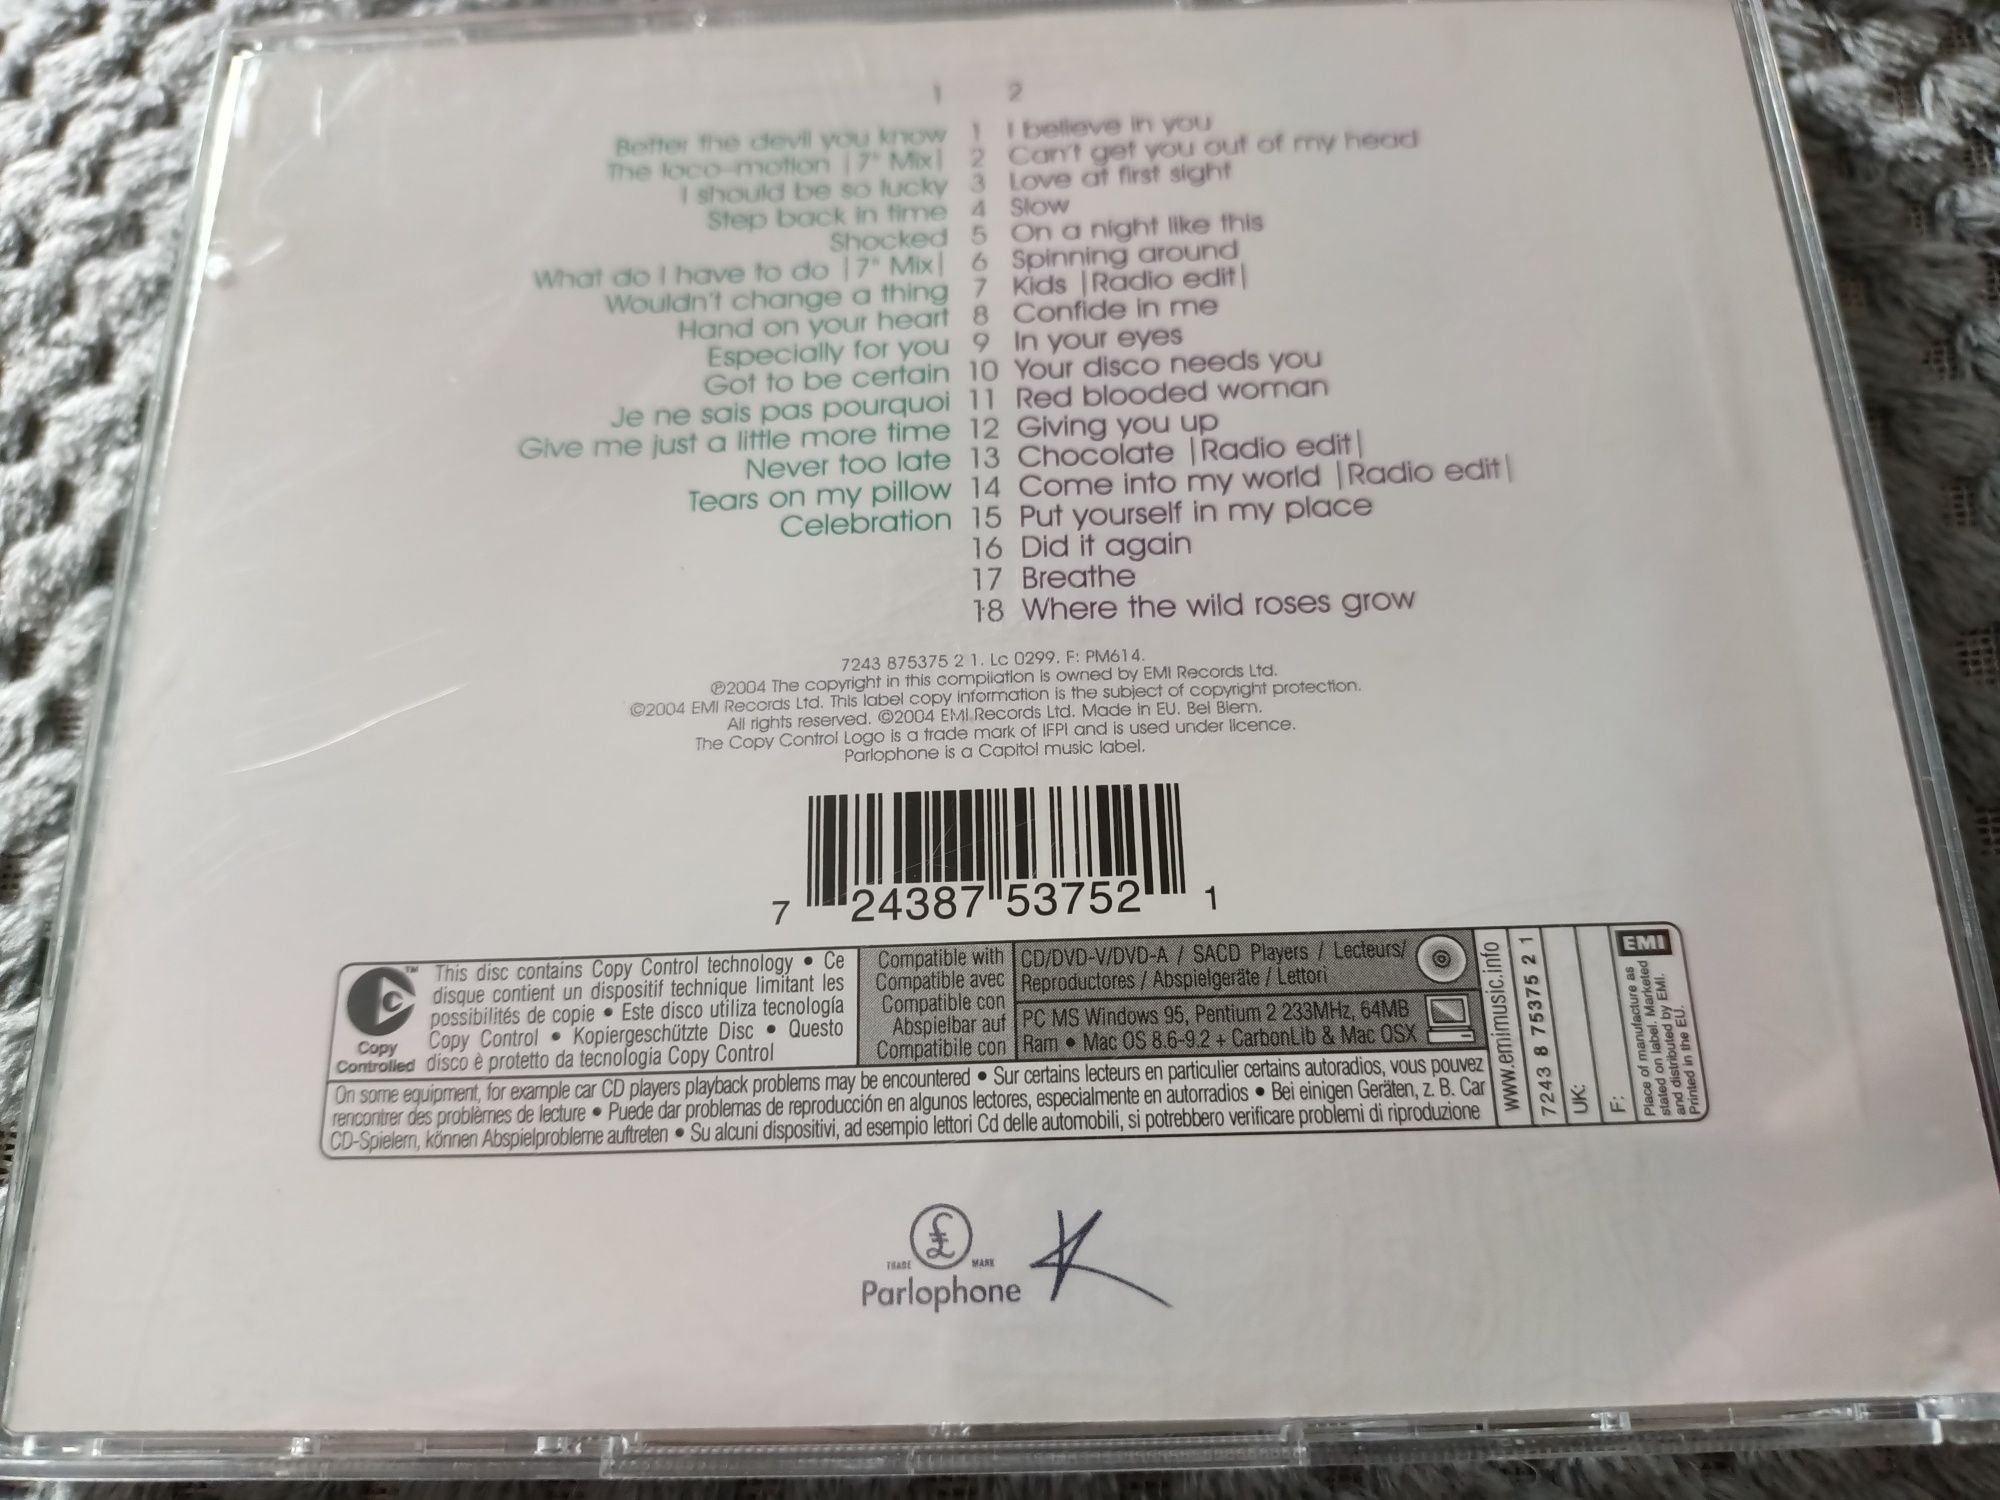 Kylie Minogue - Ultimate Kylie (2xCD, Comp, Copy Prot.)(vg+)